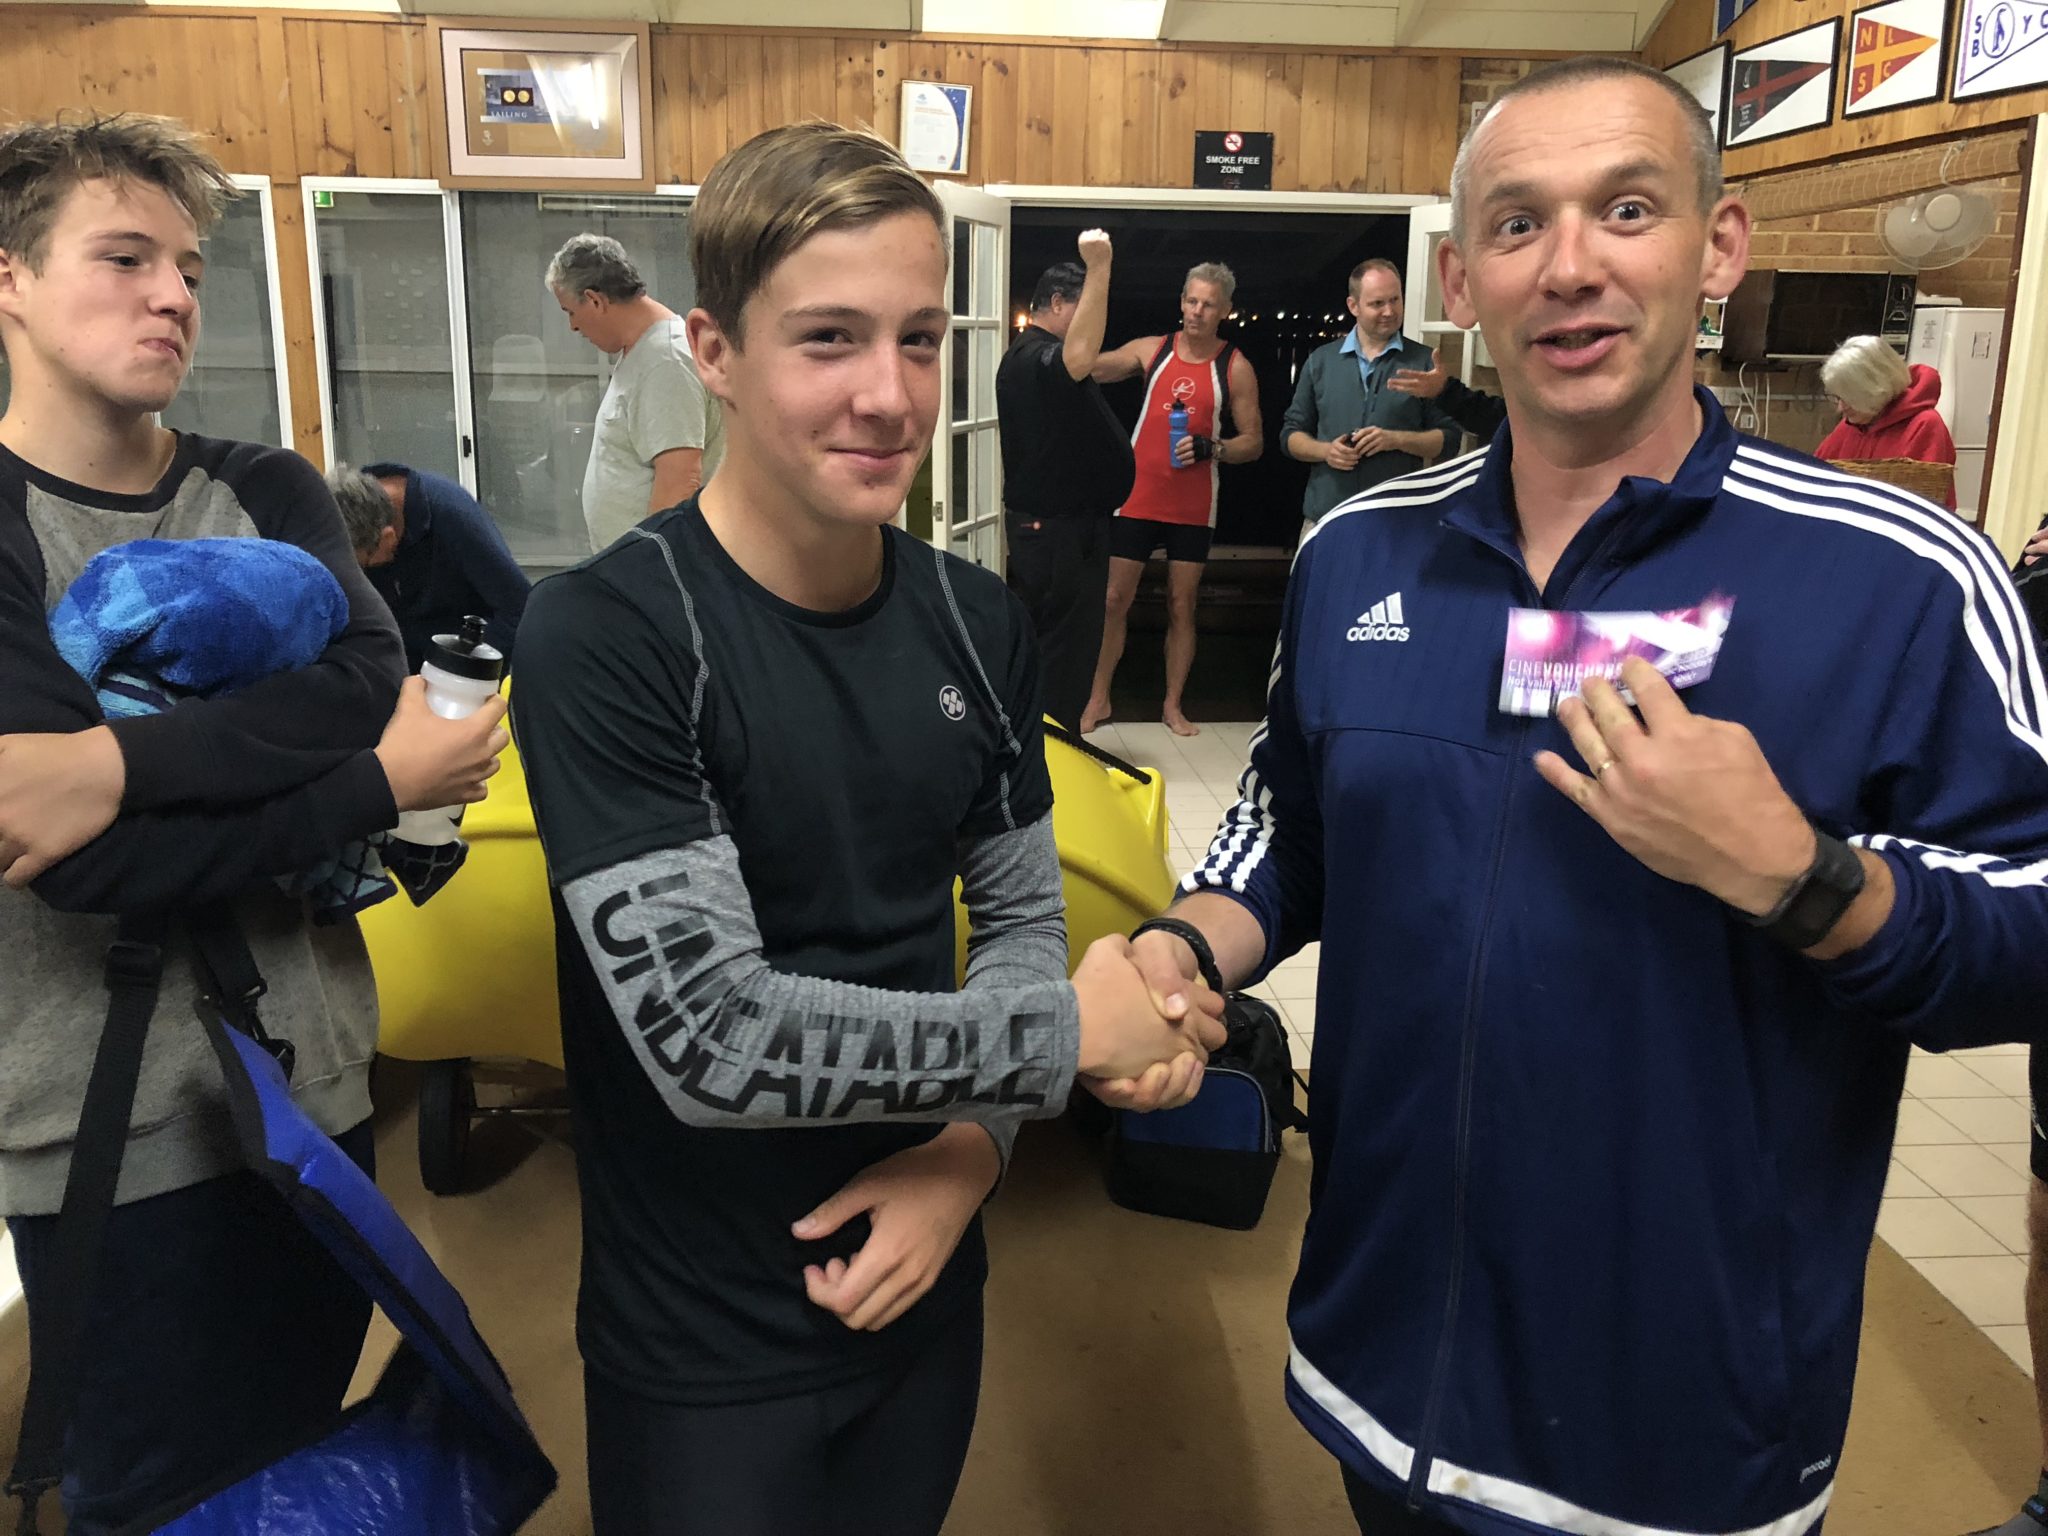 Tues 22nd May 2018 : Tonight’s photo shows Noah Boldy presenting Dave Boldy with a movie voucher.